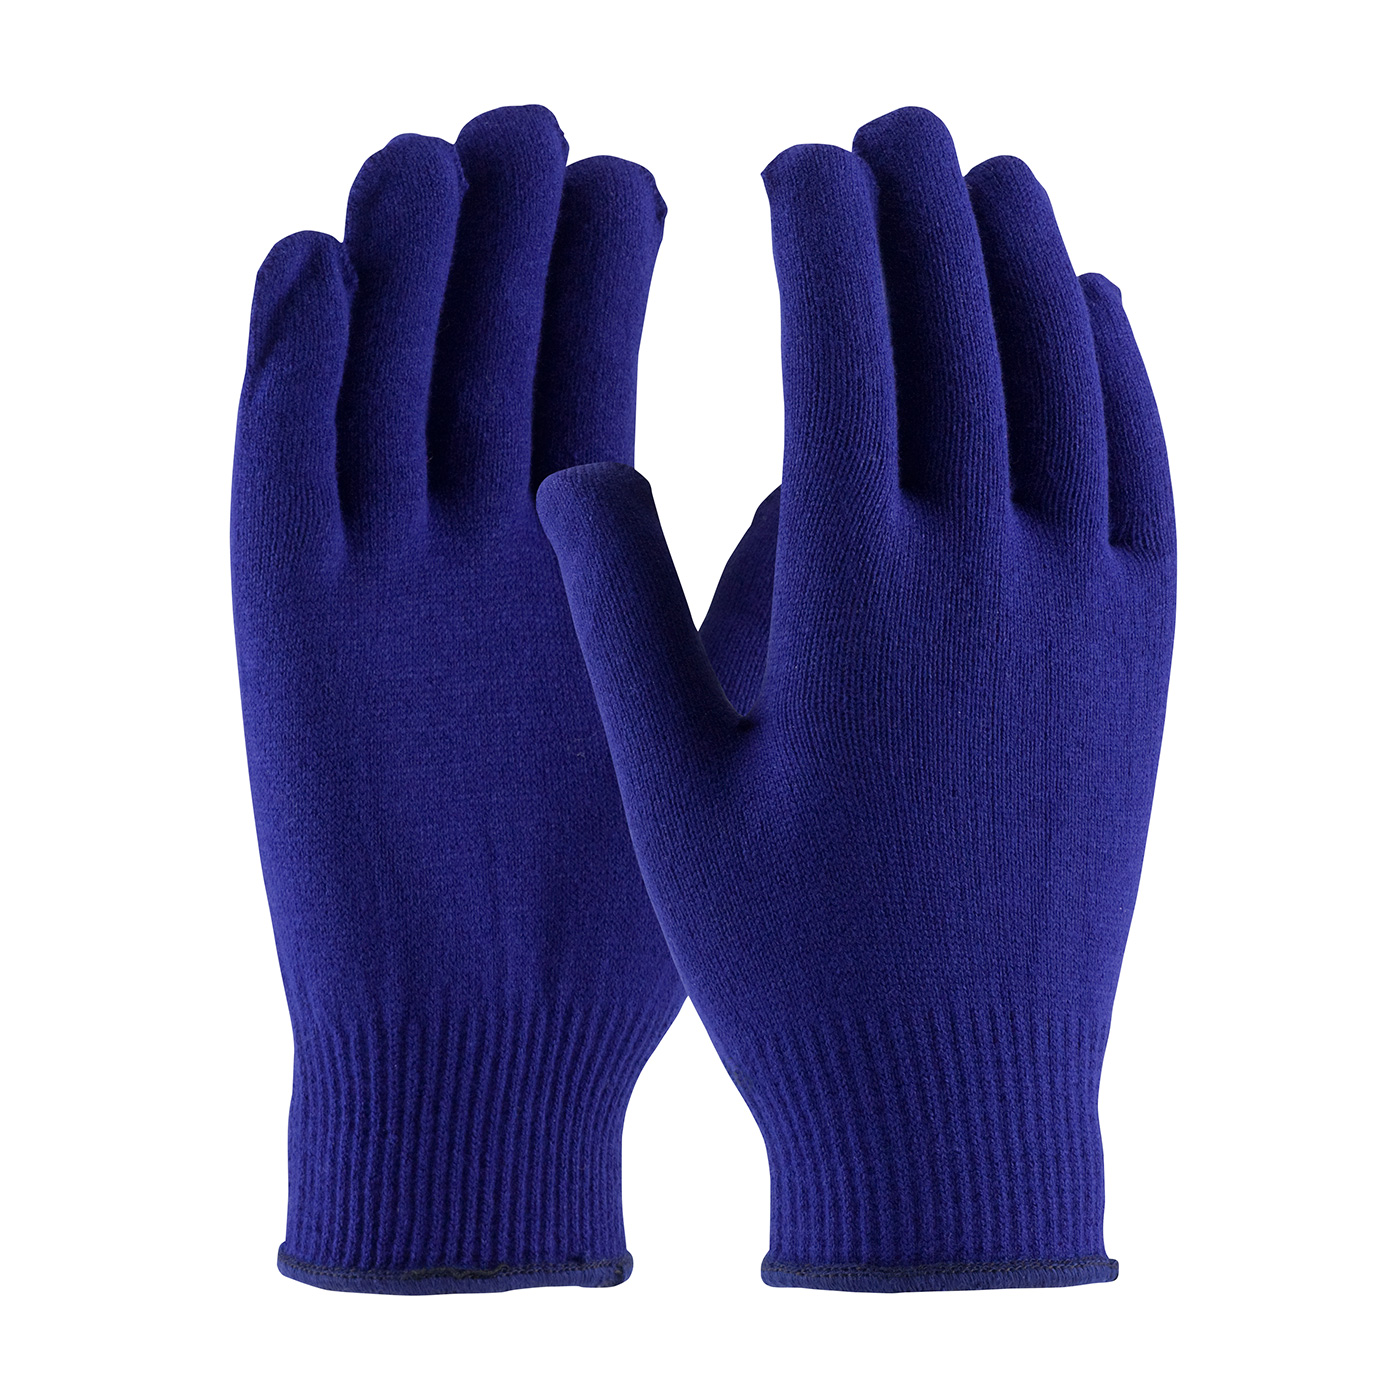 Winter Knit Thermal Glove Liners, Winter Glove Liners